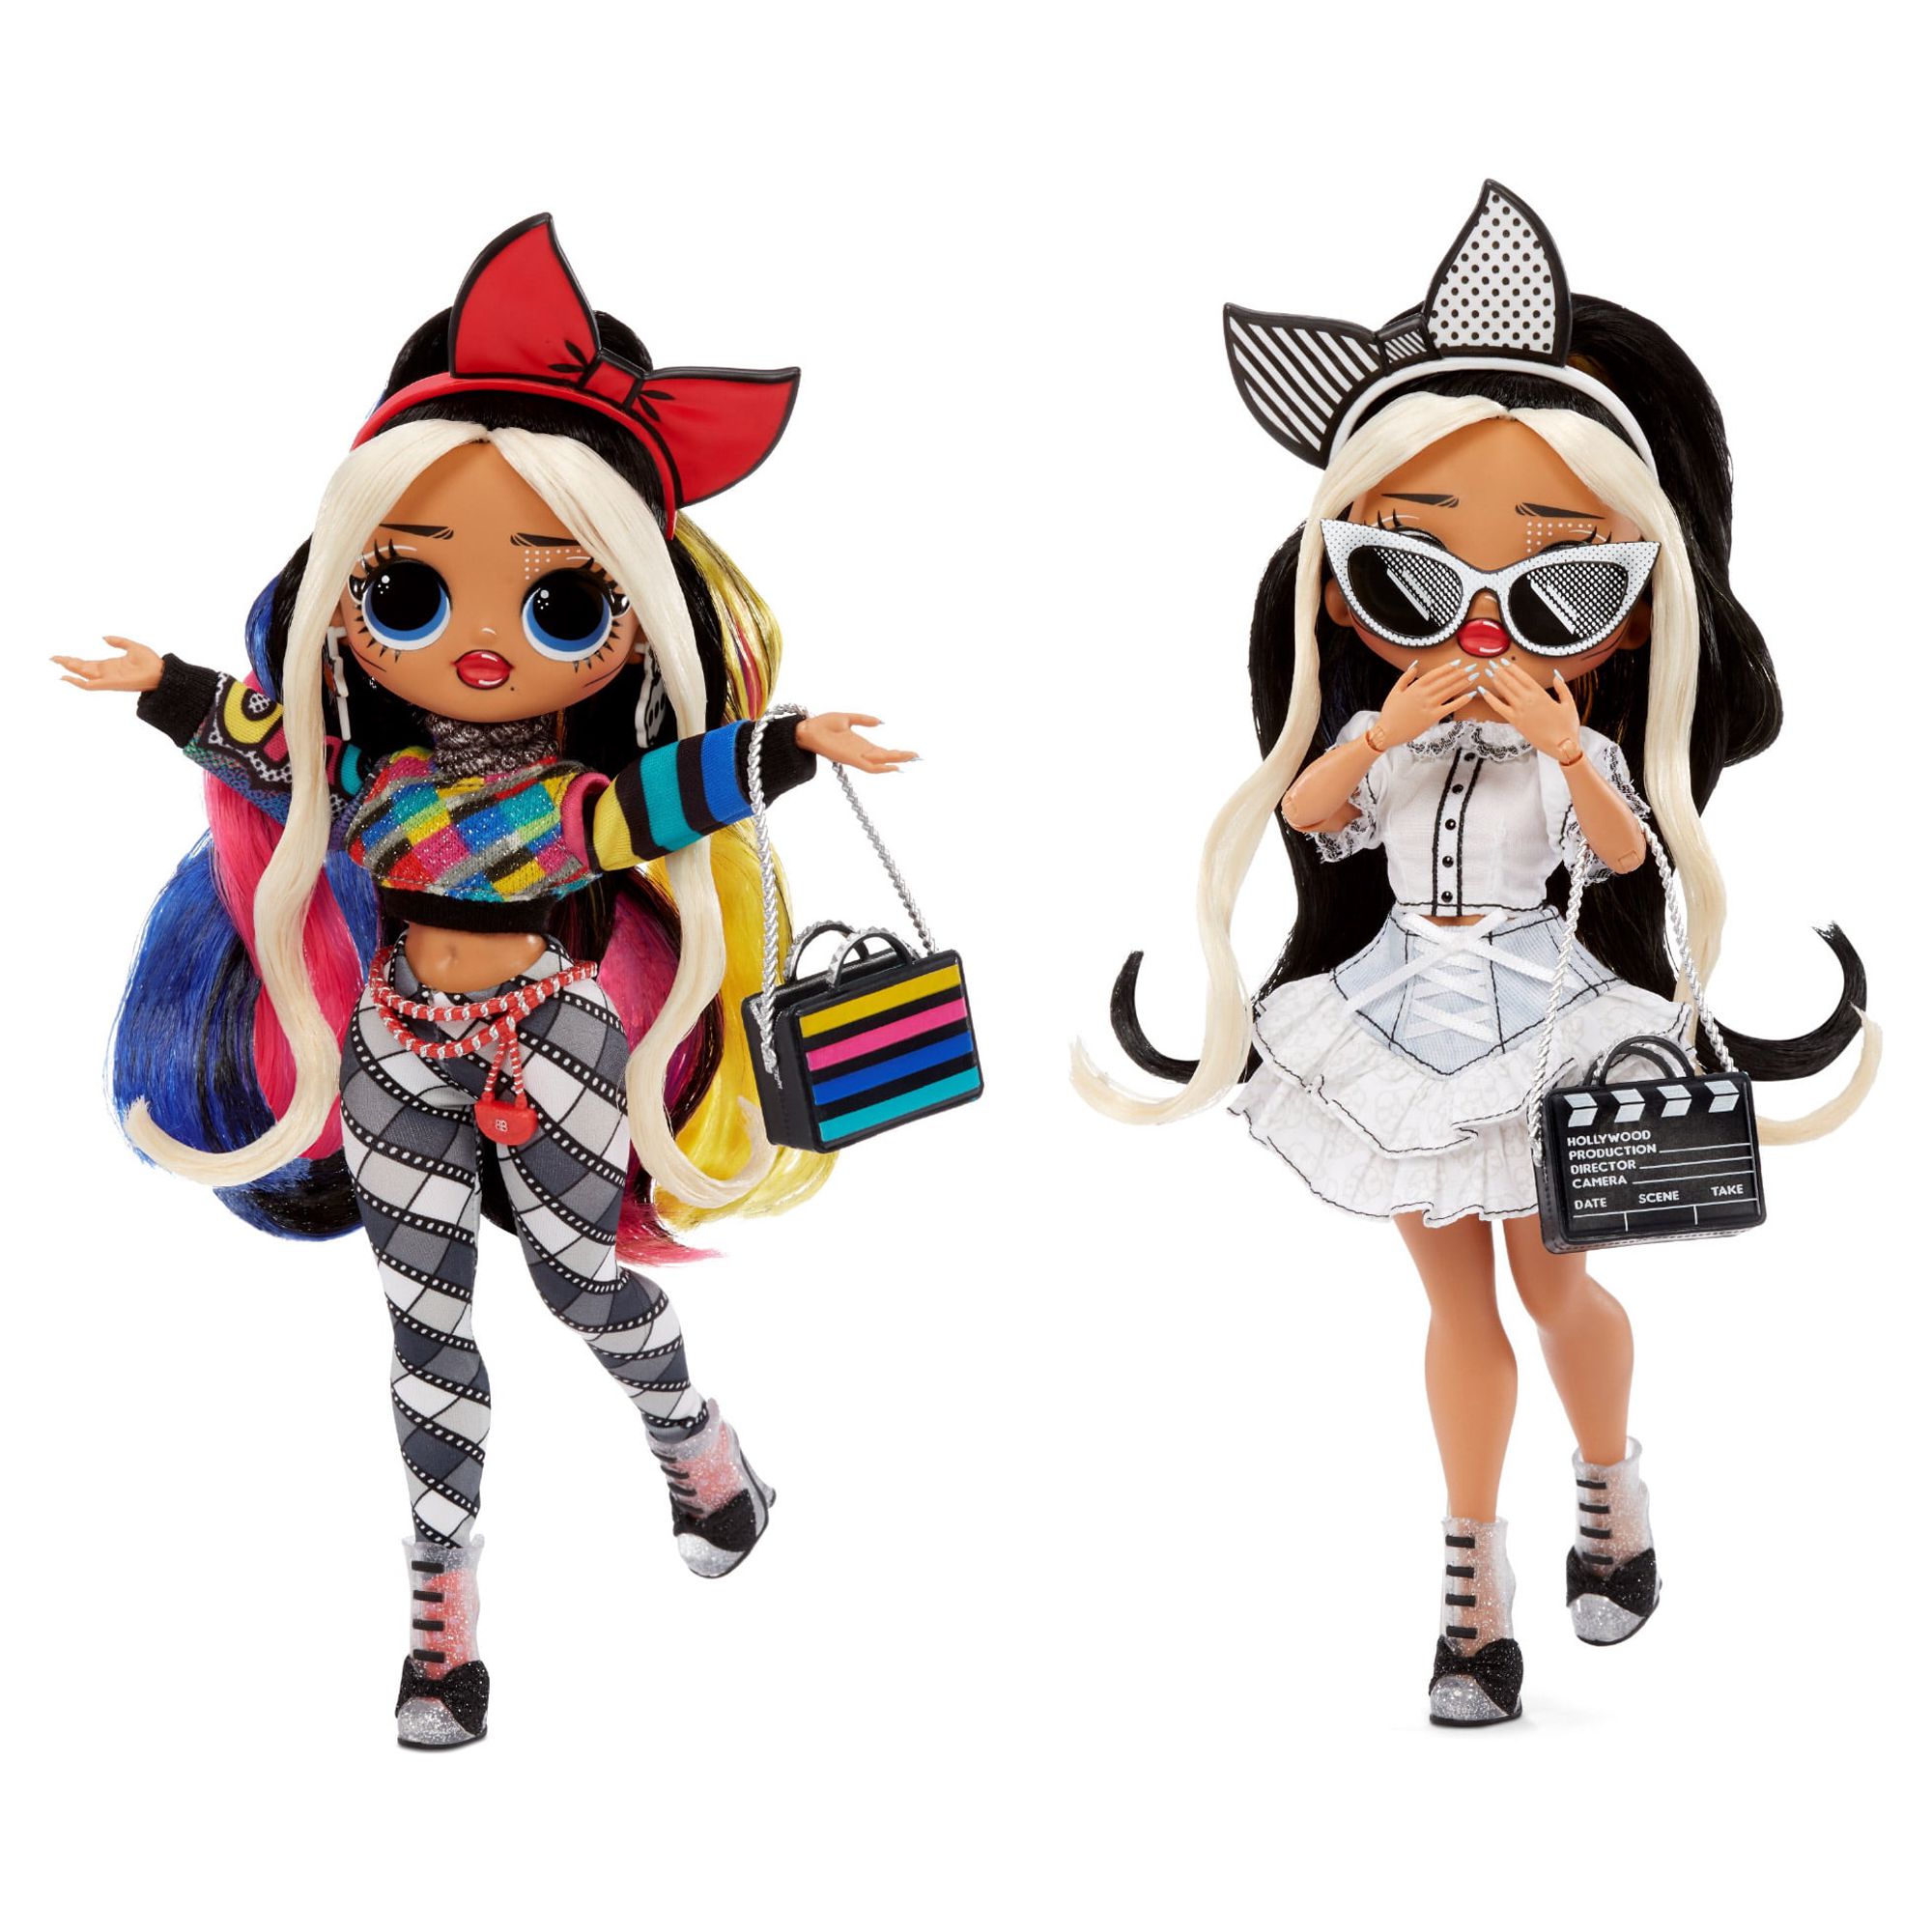 LOL Surprise OMG Movie Magic™ Starlette Fashion Doll With 25 Surprises Including 2 Fashion Outfits, 3D Glasses, Movie Playset - Toys for Girls Ages 4 5 6+ - image 4 of 7